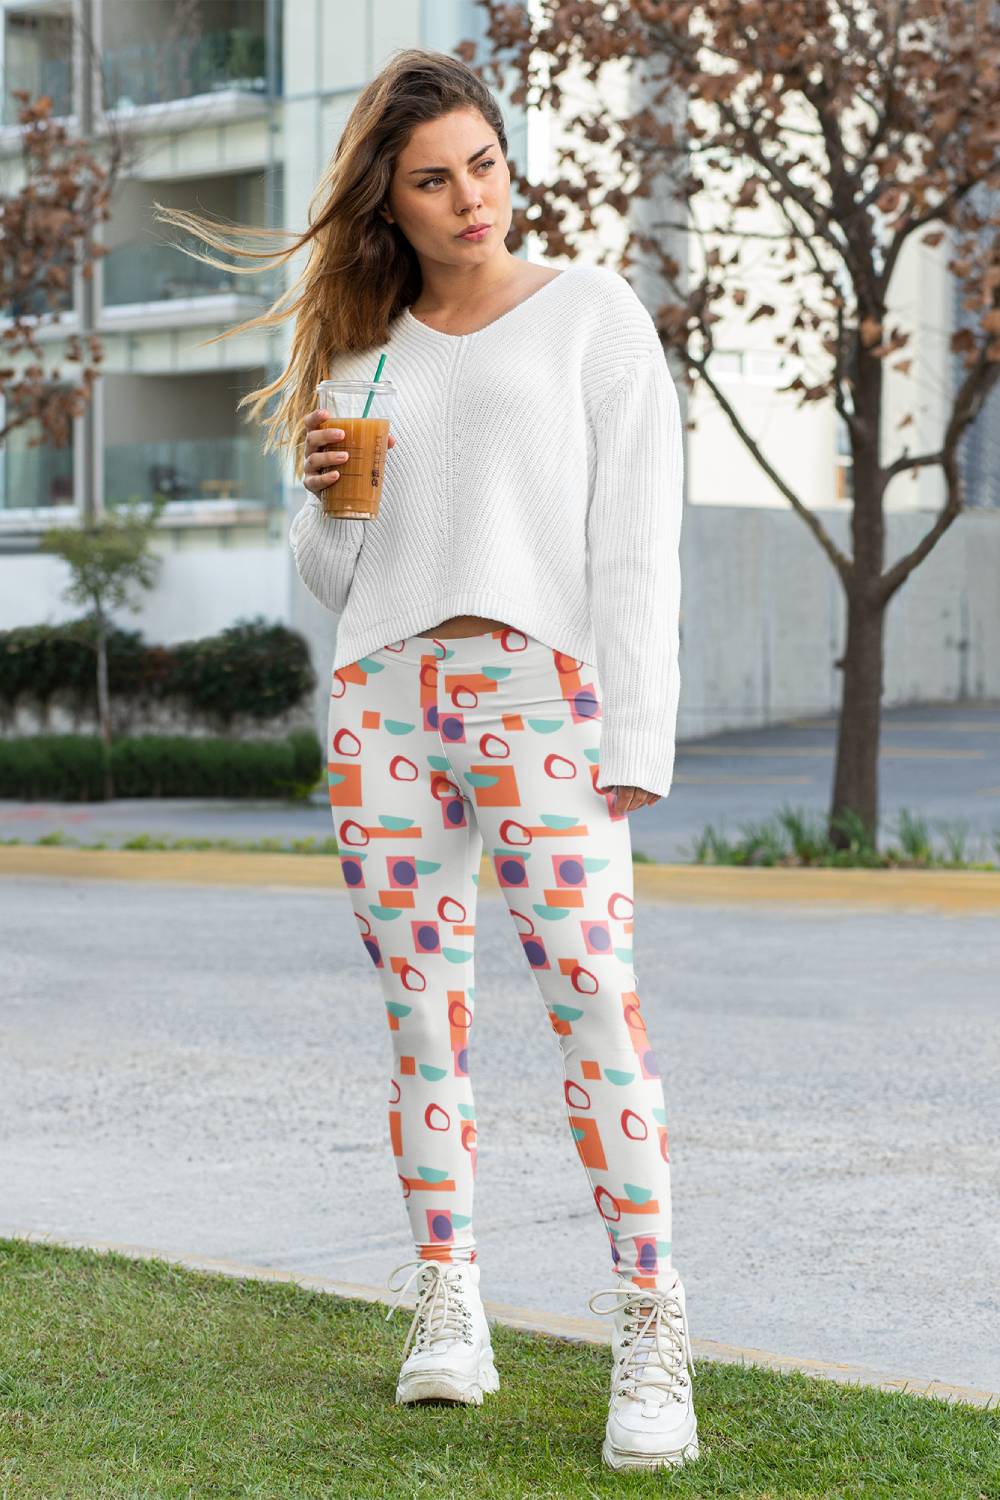 Statement-Making Prints: The Revival of Patterned Leggings